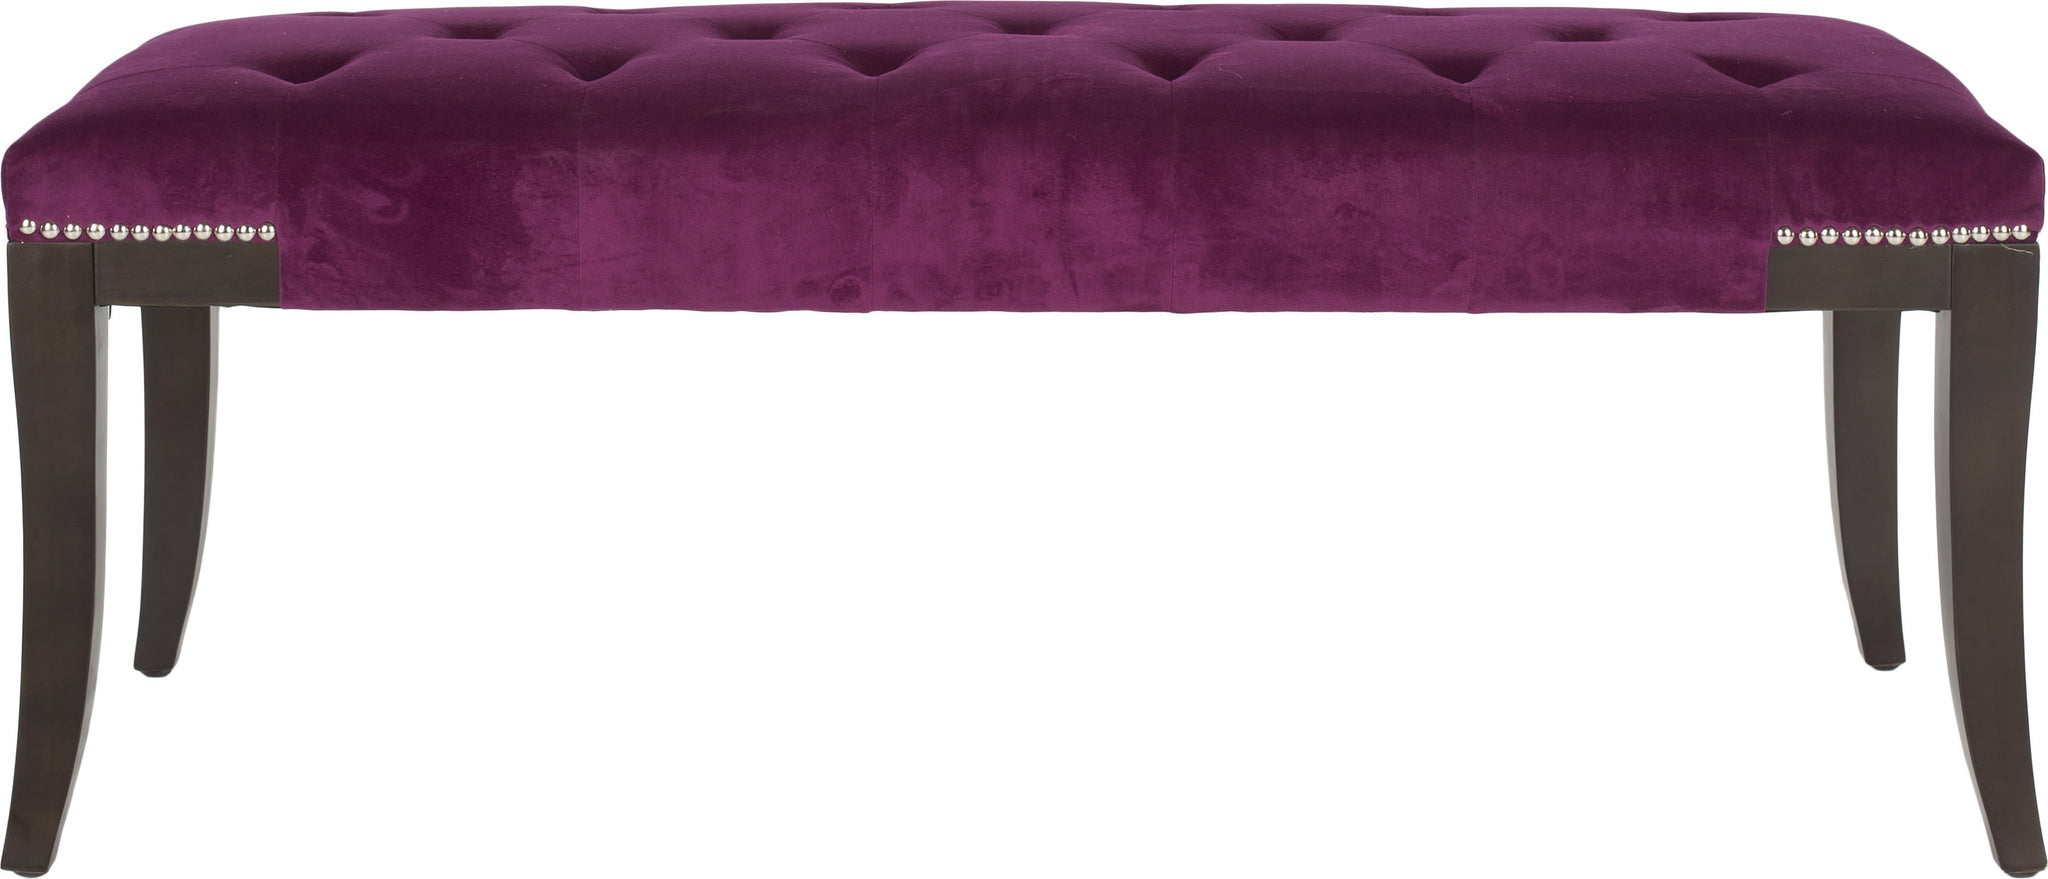 Safavieh Gibbons Bench-Silver Nail Heads Plum and Espresso Furniture main image